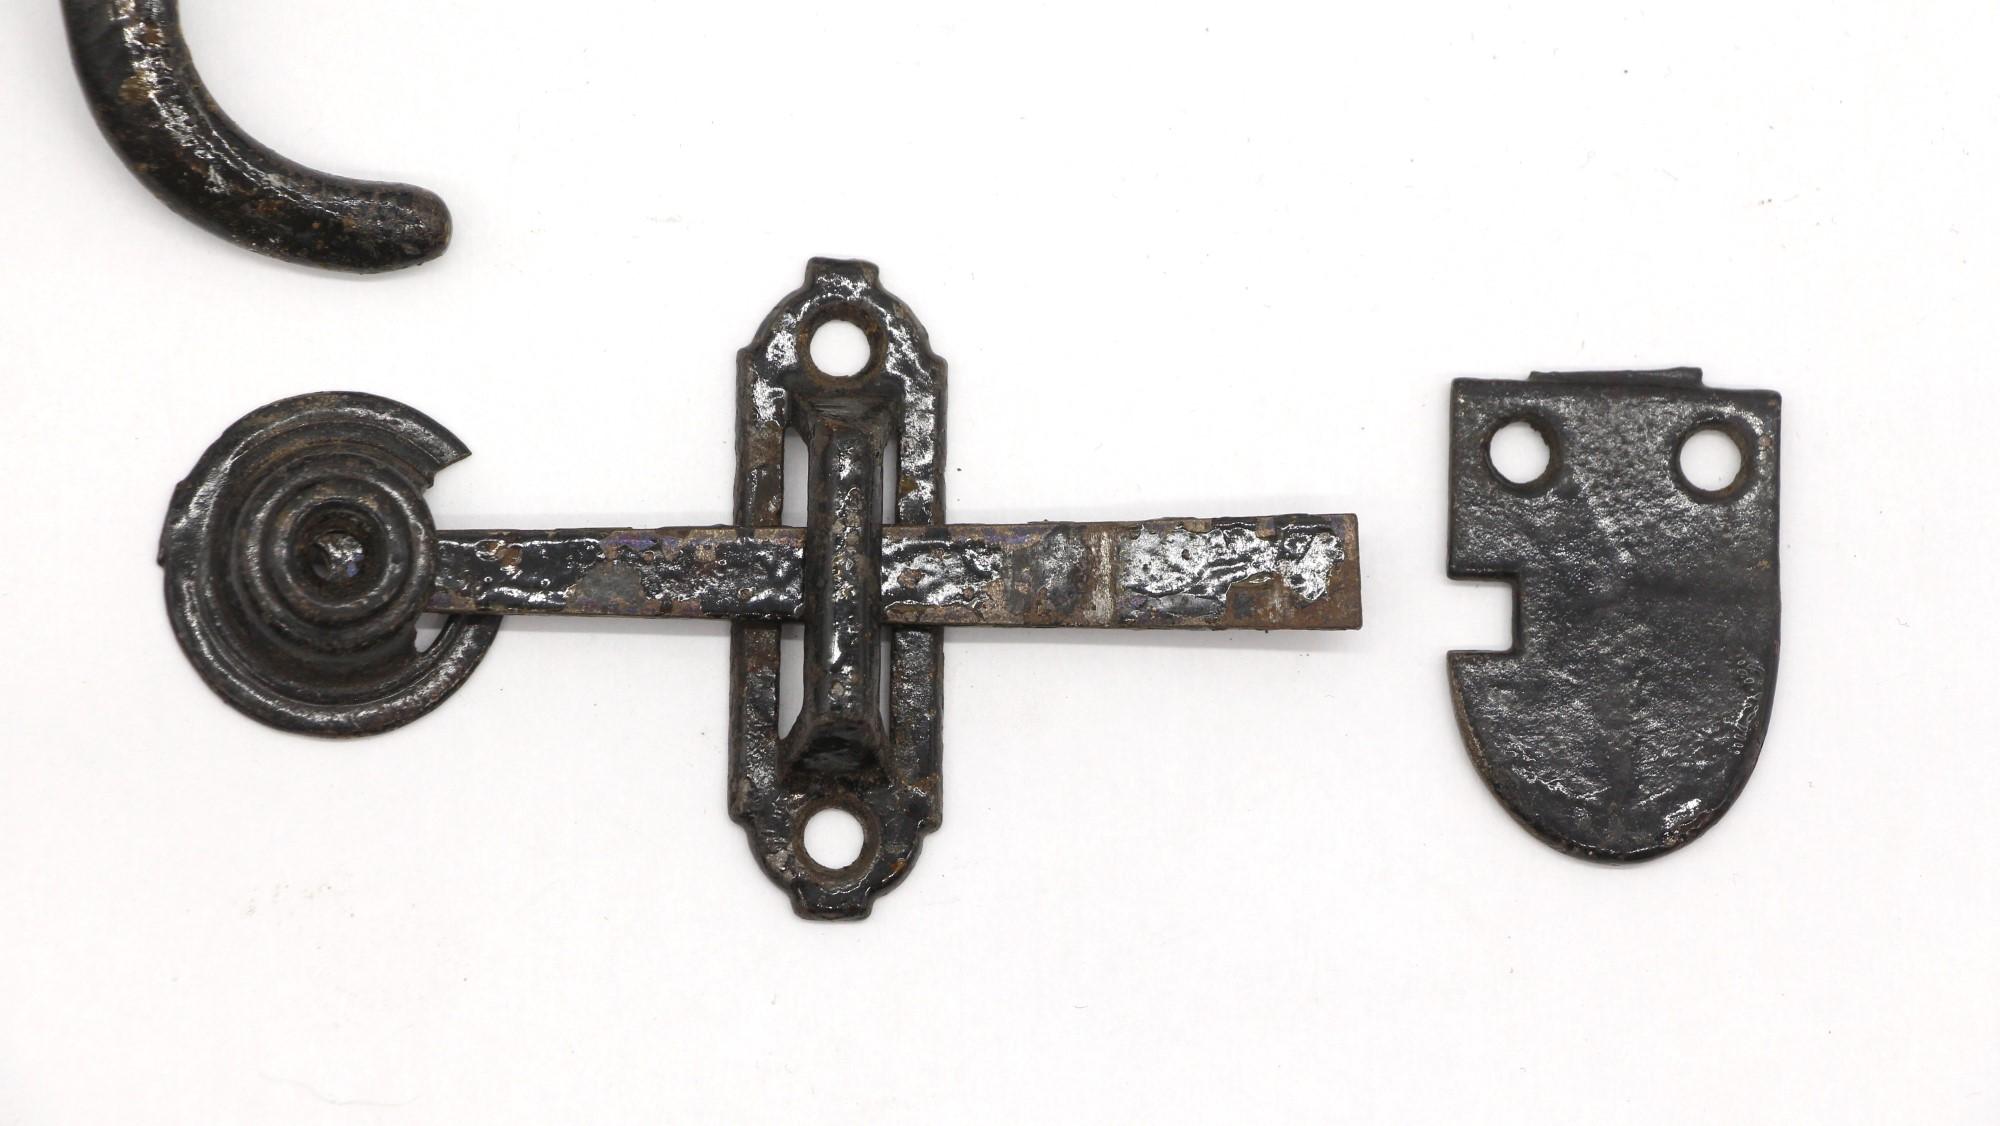 Early 20th century set black cast iron door handle with latch. Complete with all the parts. Light wear. Priced per set. Small quantity available at time of posting. Priced each. Please inquire. Please note, this item is located in our Scranton, PA